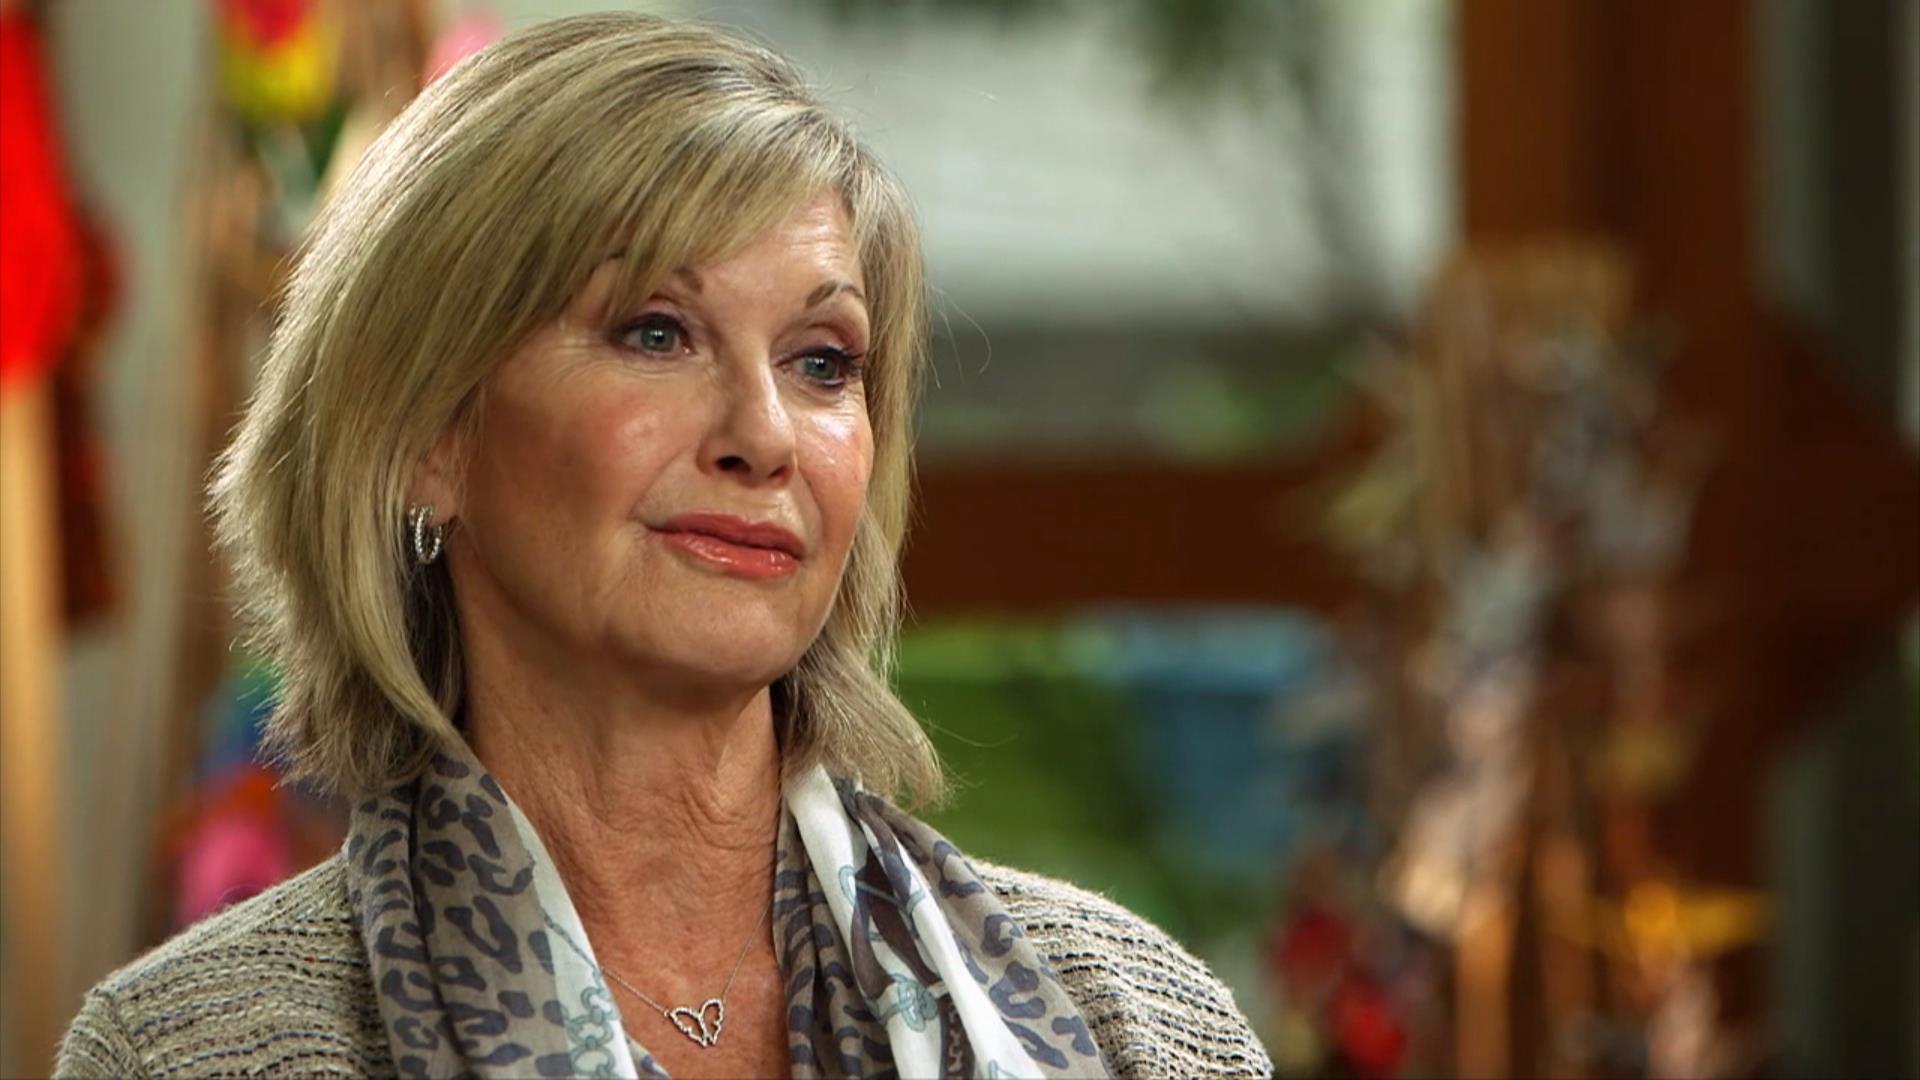 olivia newton-john on her second fight with cancer: 'i can